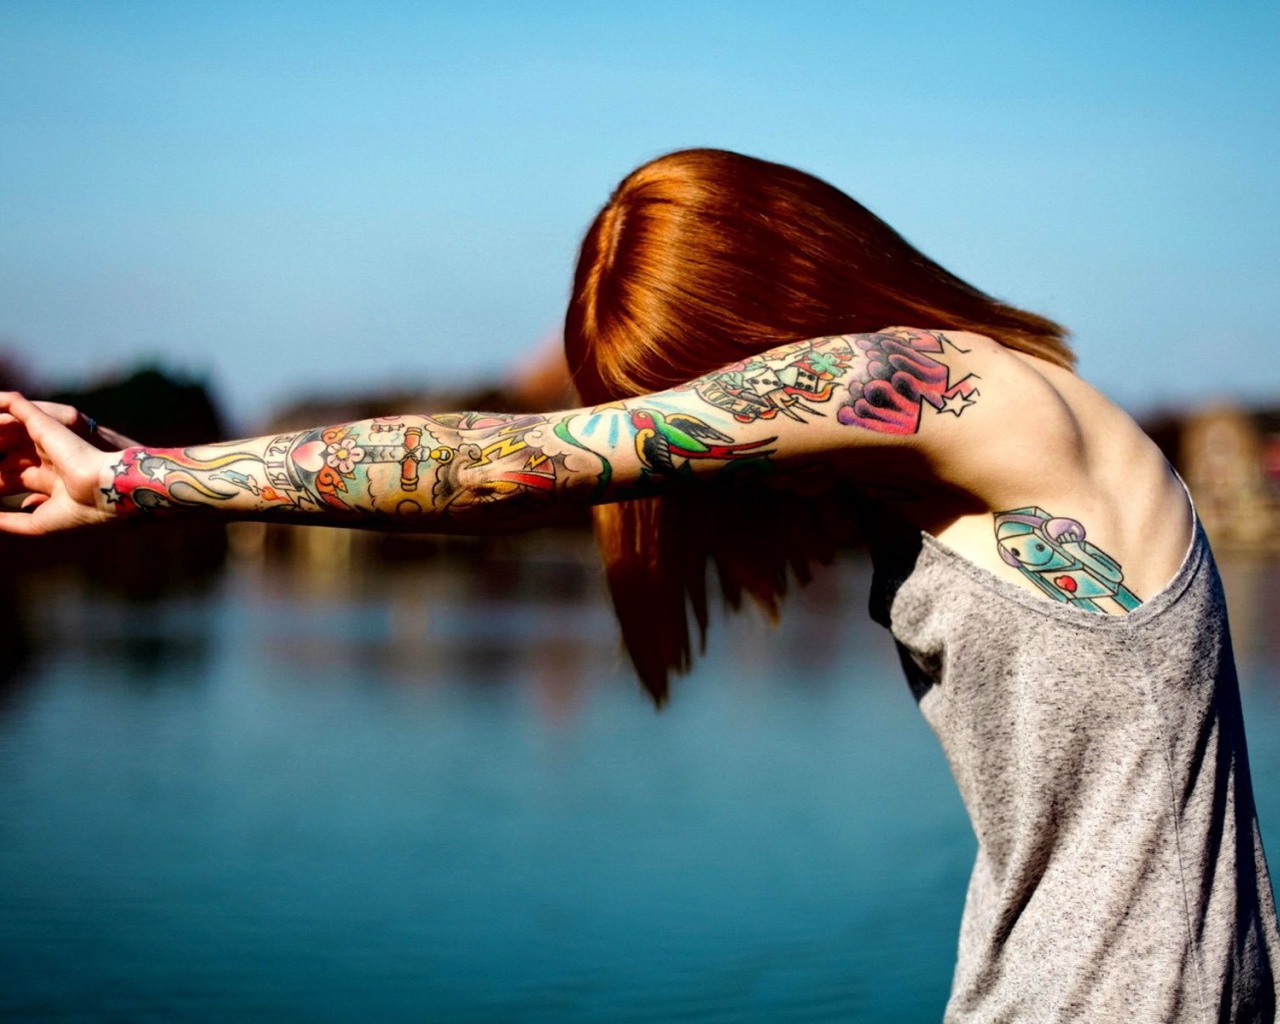 Woman with tattoo